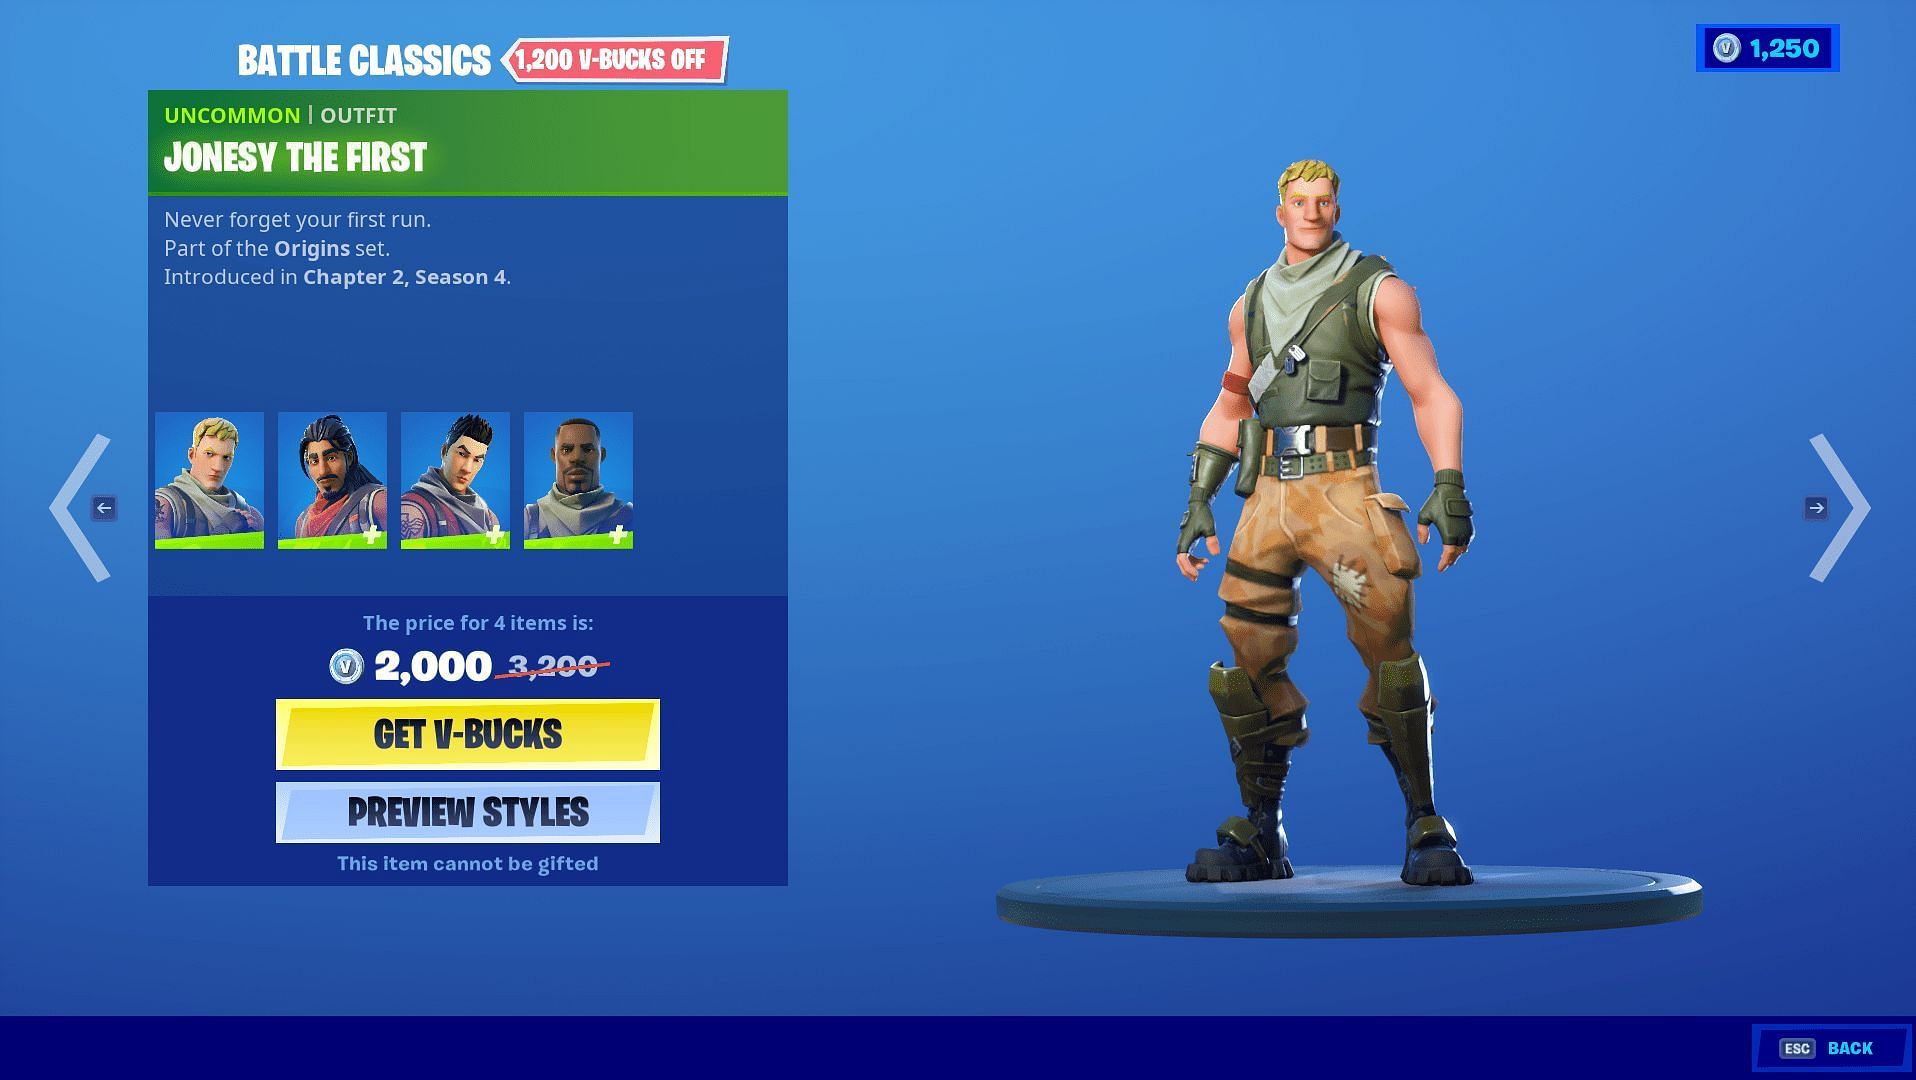 Jonesy the First (Image via Epic Games)